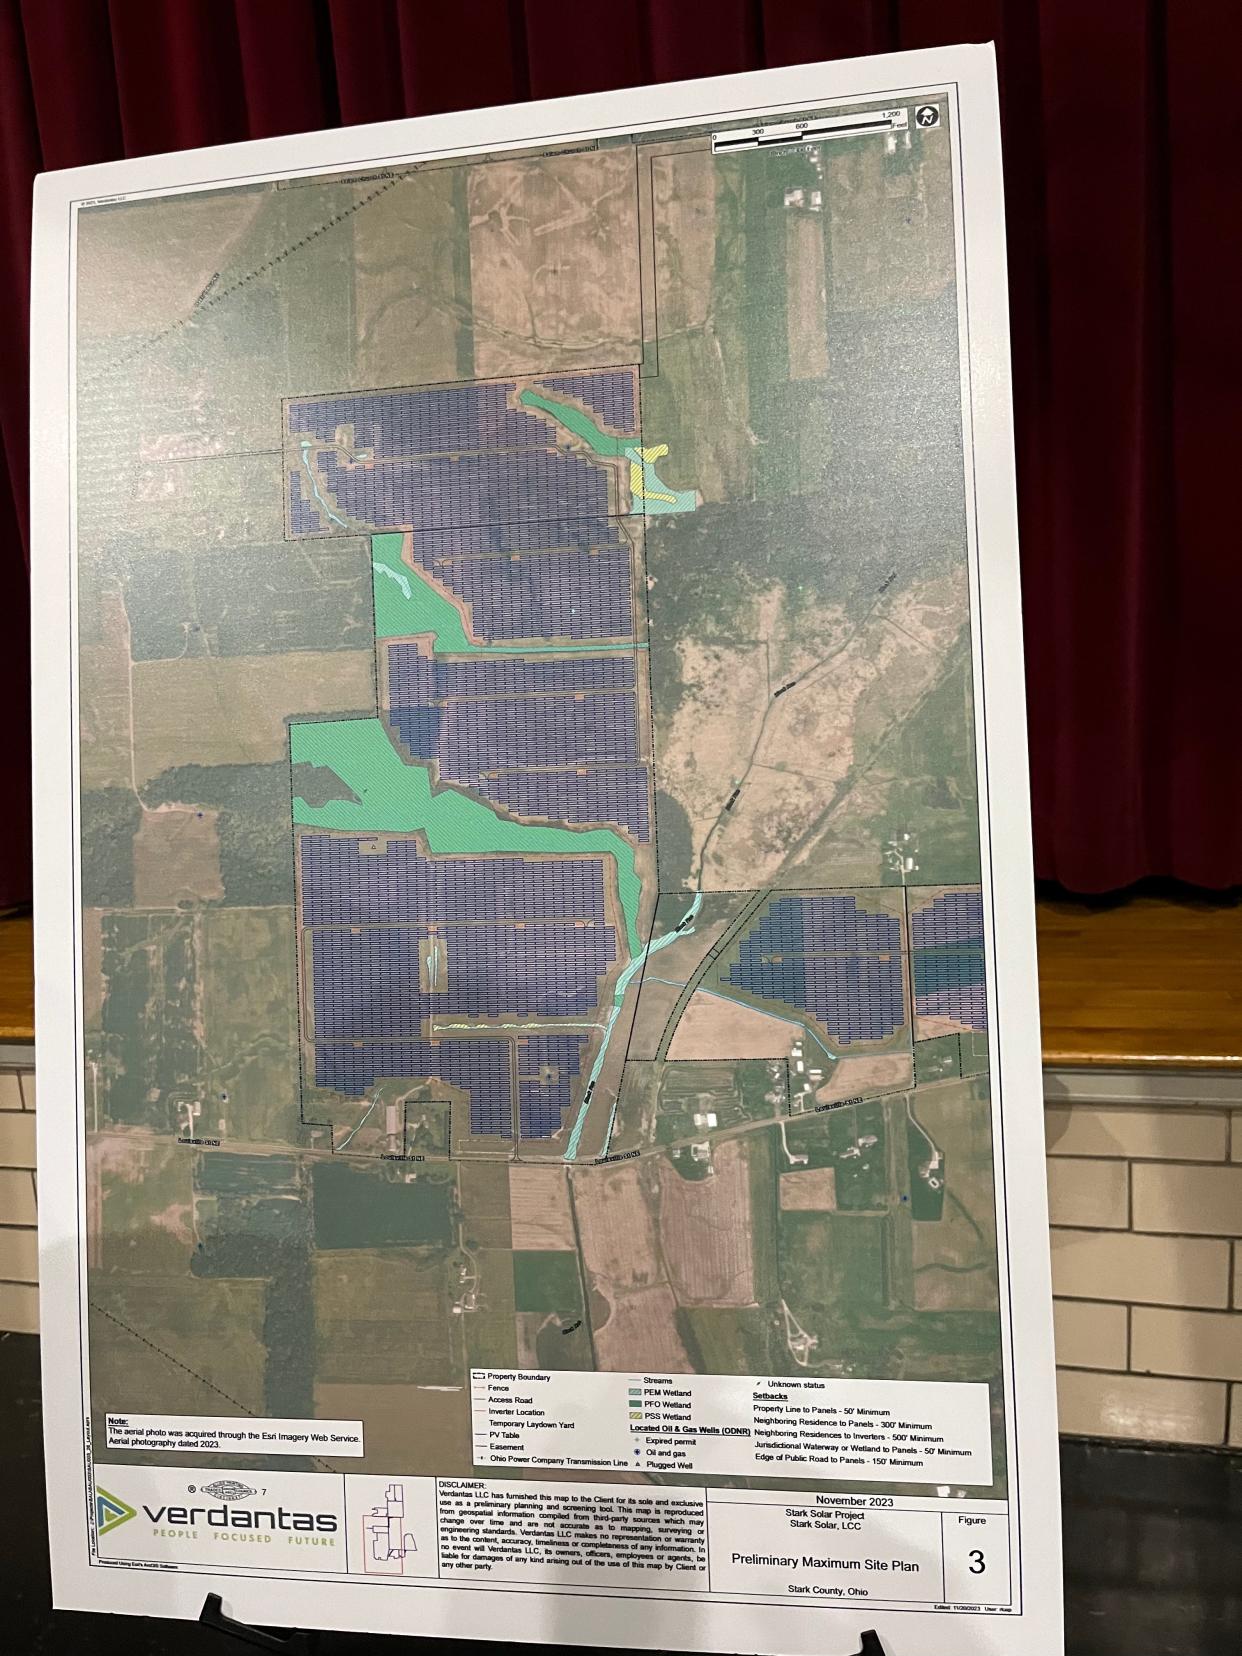 Representatives of Samsung C&T presented maps like this at Washington Elementary Wednesday night showing where solar panels would be placed on leased properties in Washington Township.